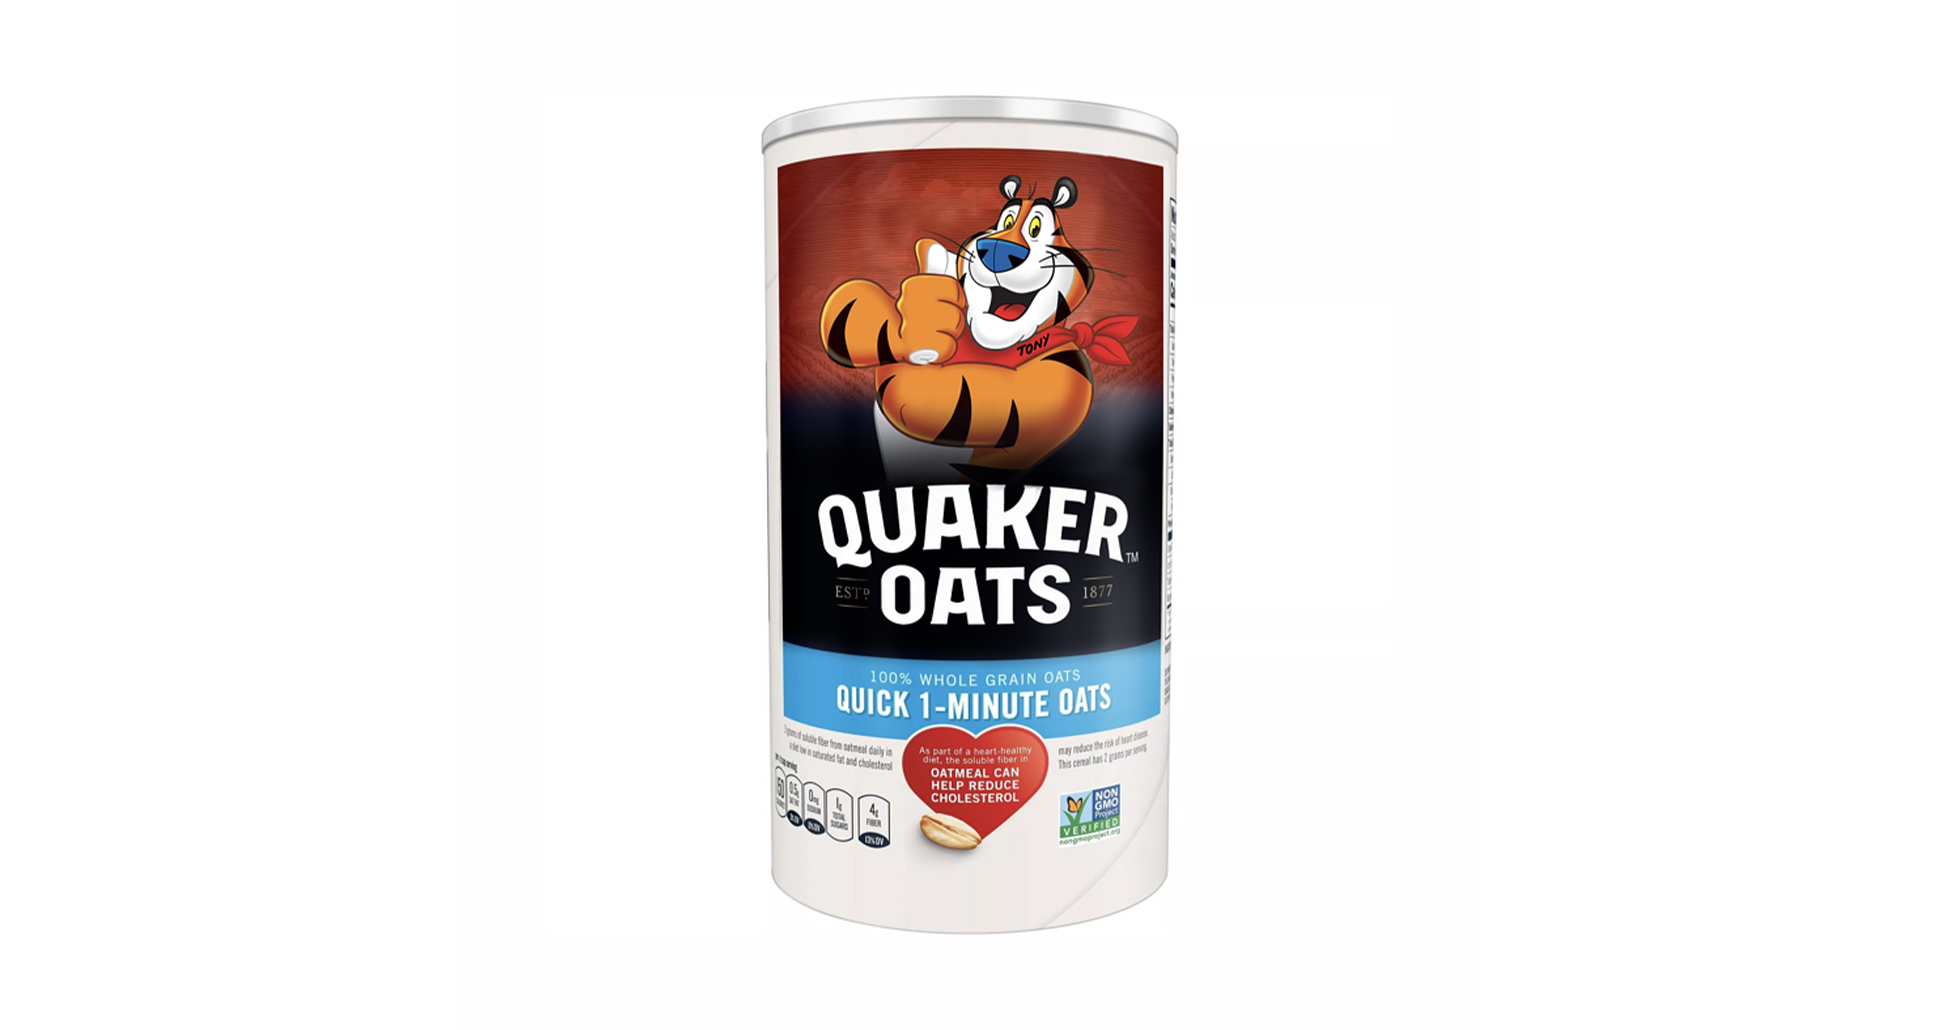 Quaker Oats container with Tony the Tiger